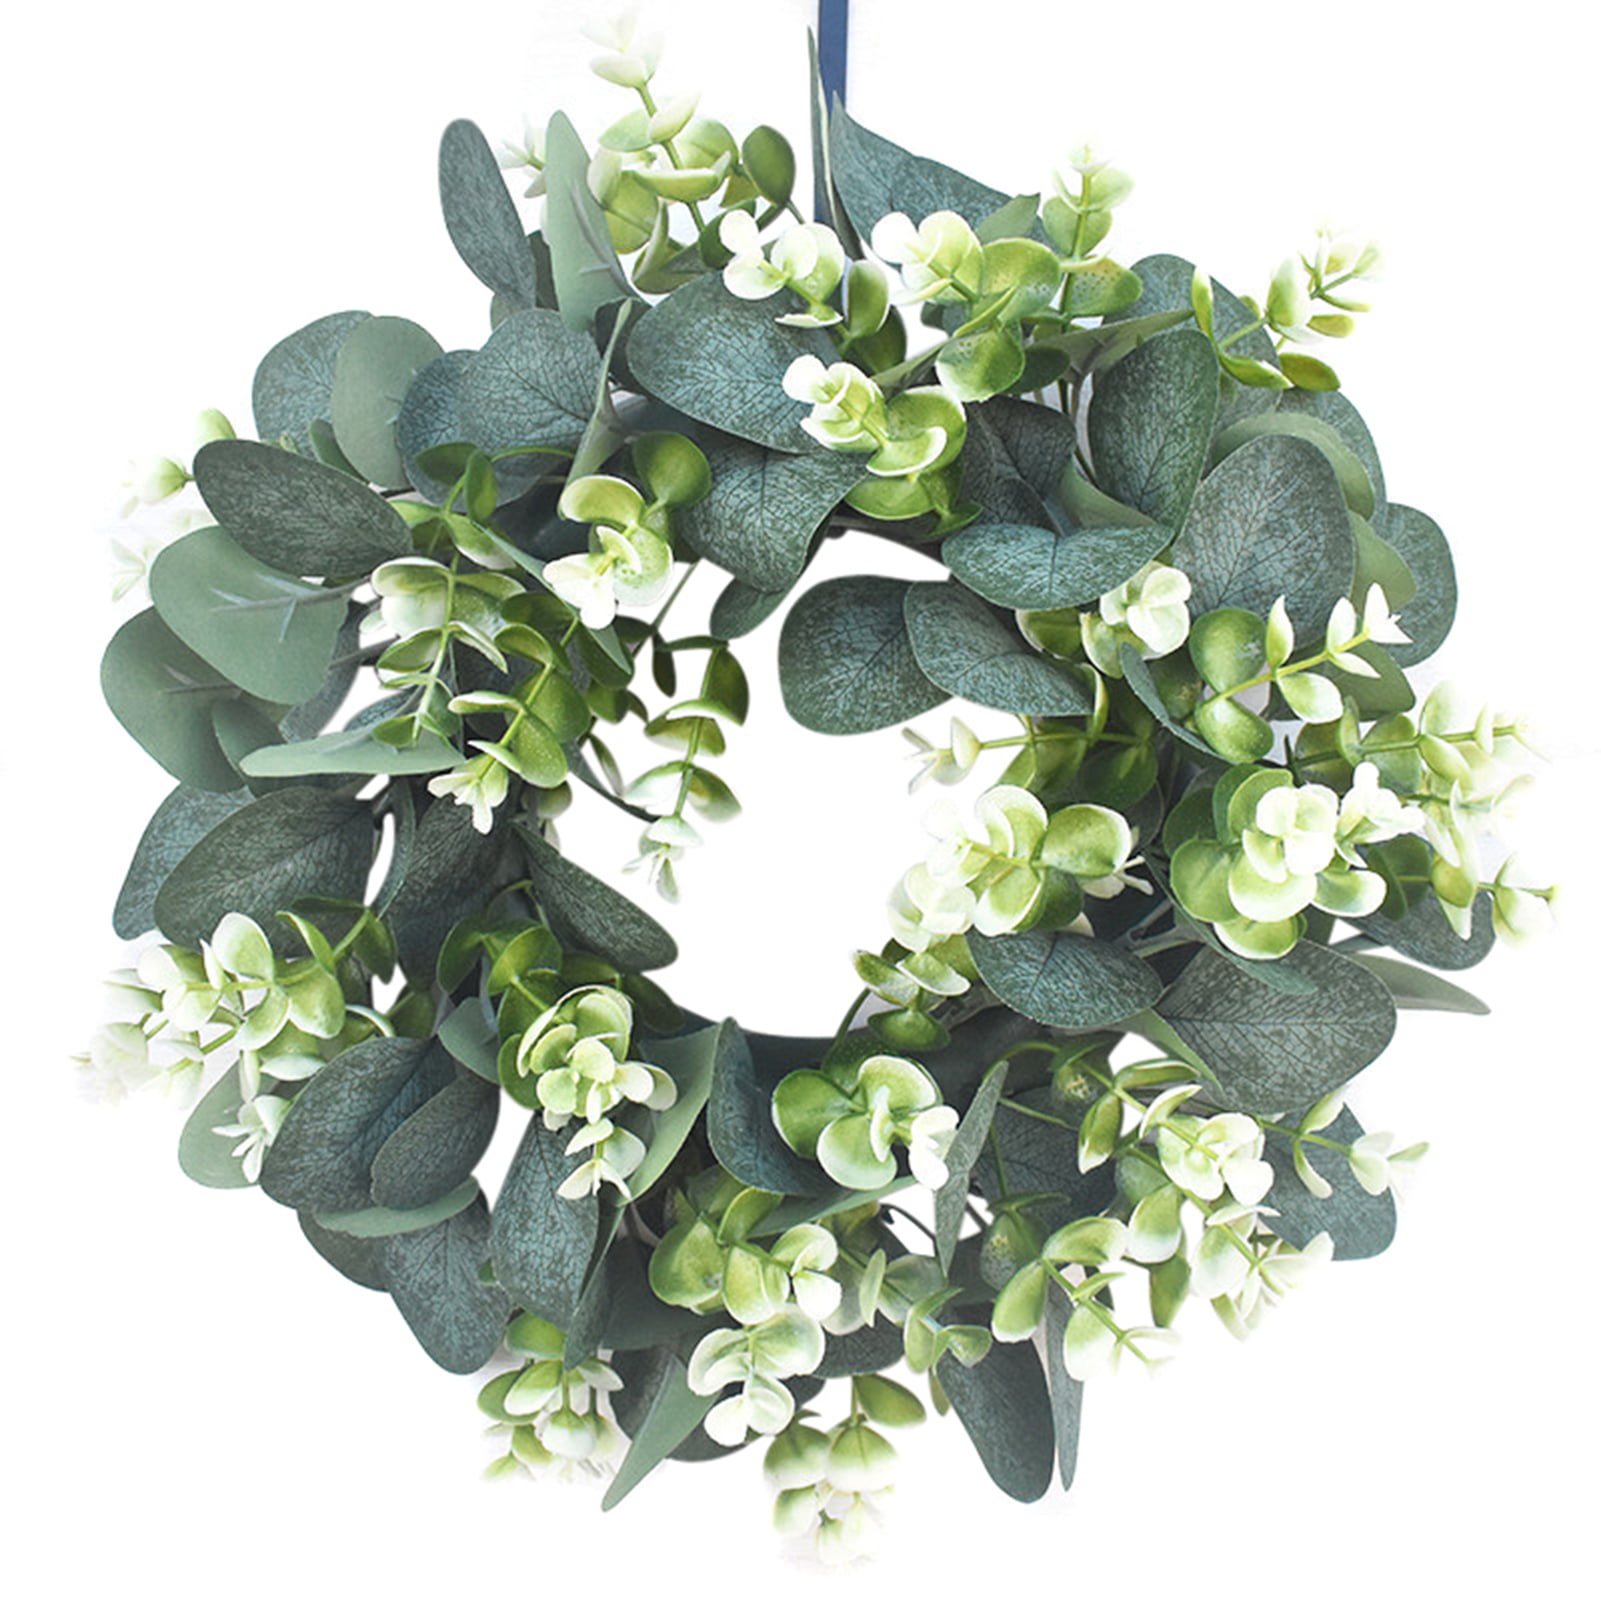 20 Inches Artificial Festival Celebration Wreath for Front Door Year Round LIFEFAIR Green Eucalyptus Leaf Wreath